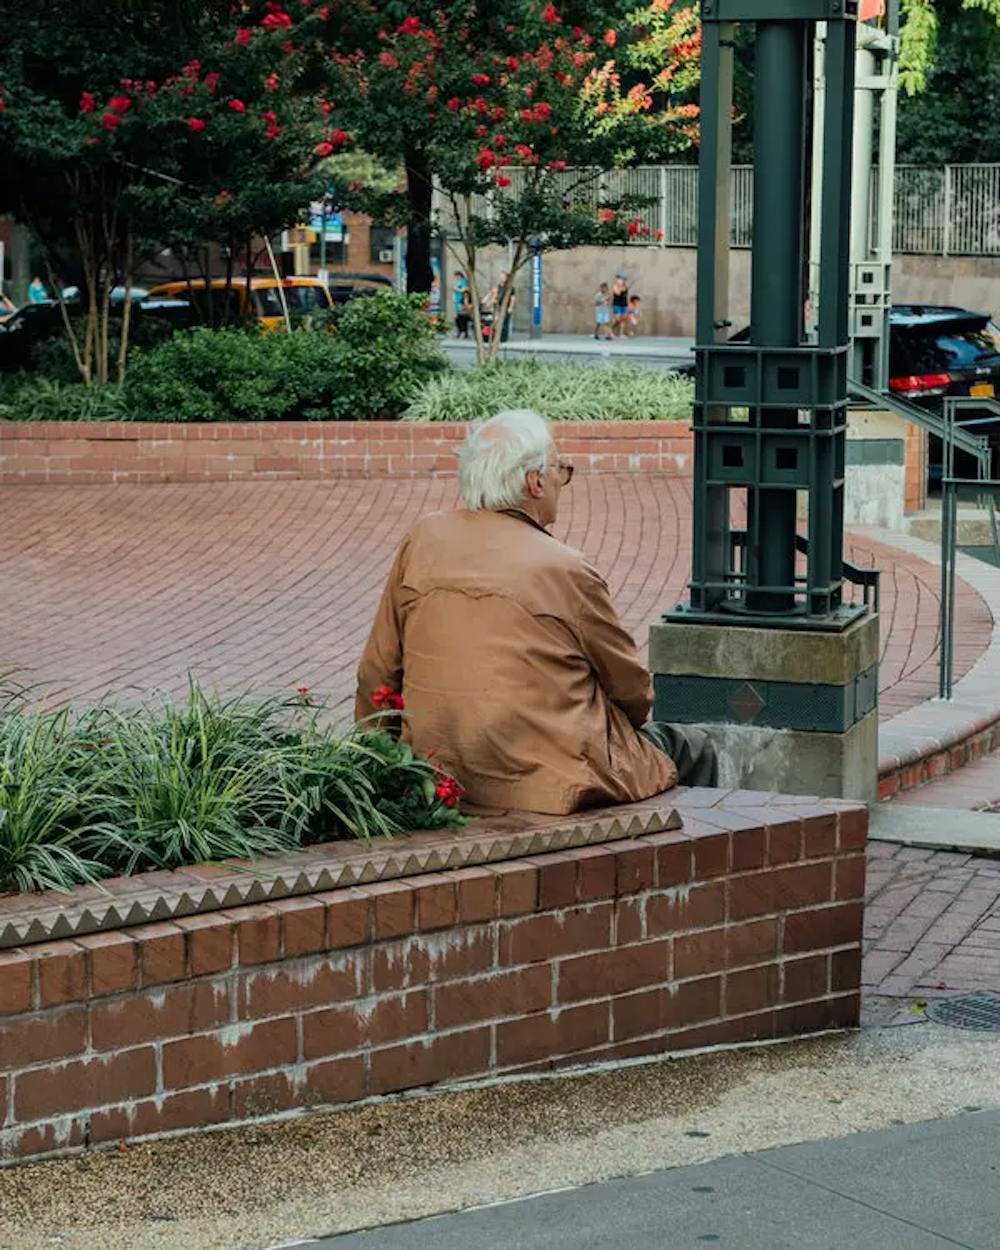 A man taking a rest on a brick bench | Source: The New York Times